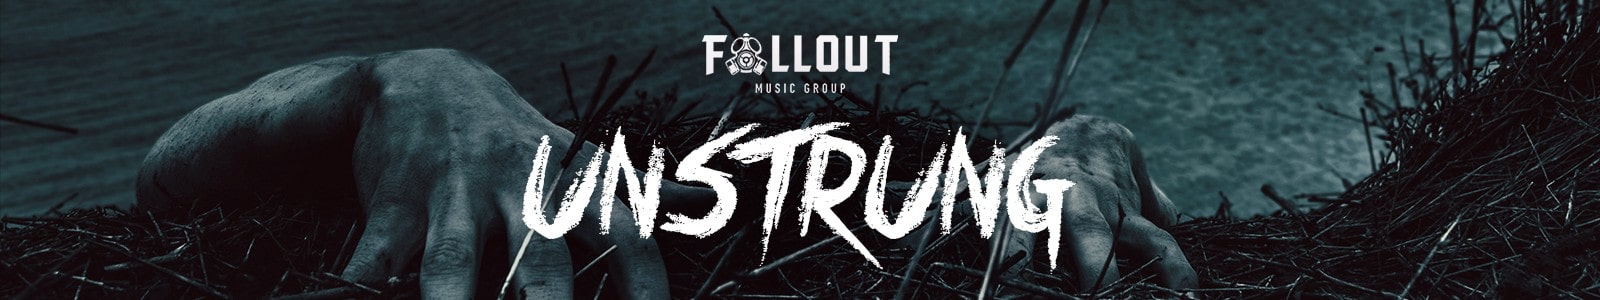 UNSTRUNG by Fallout Music Group